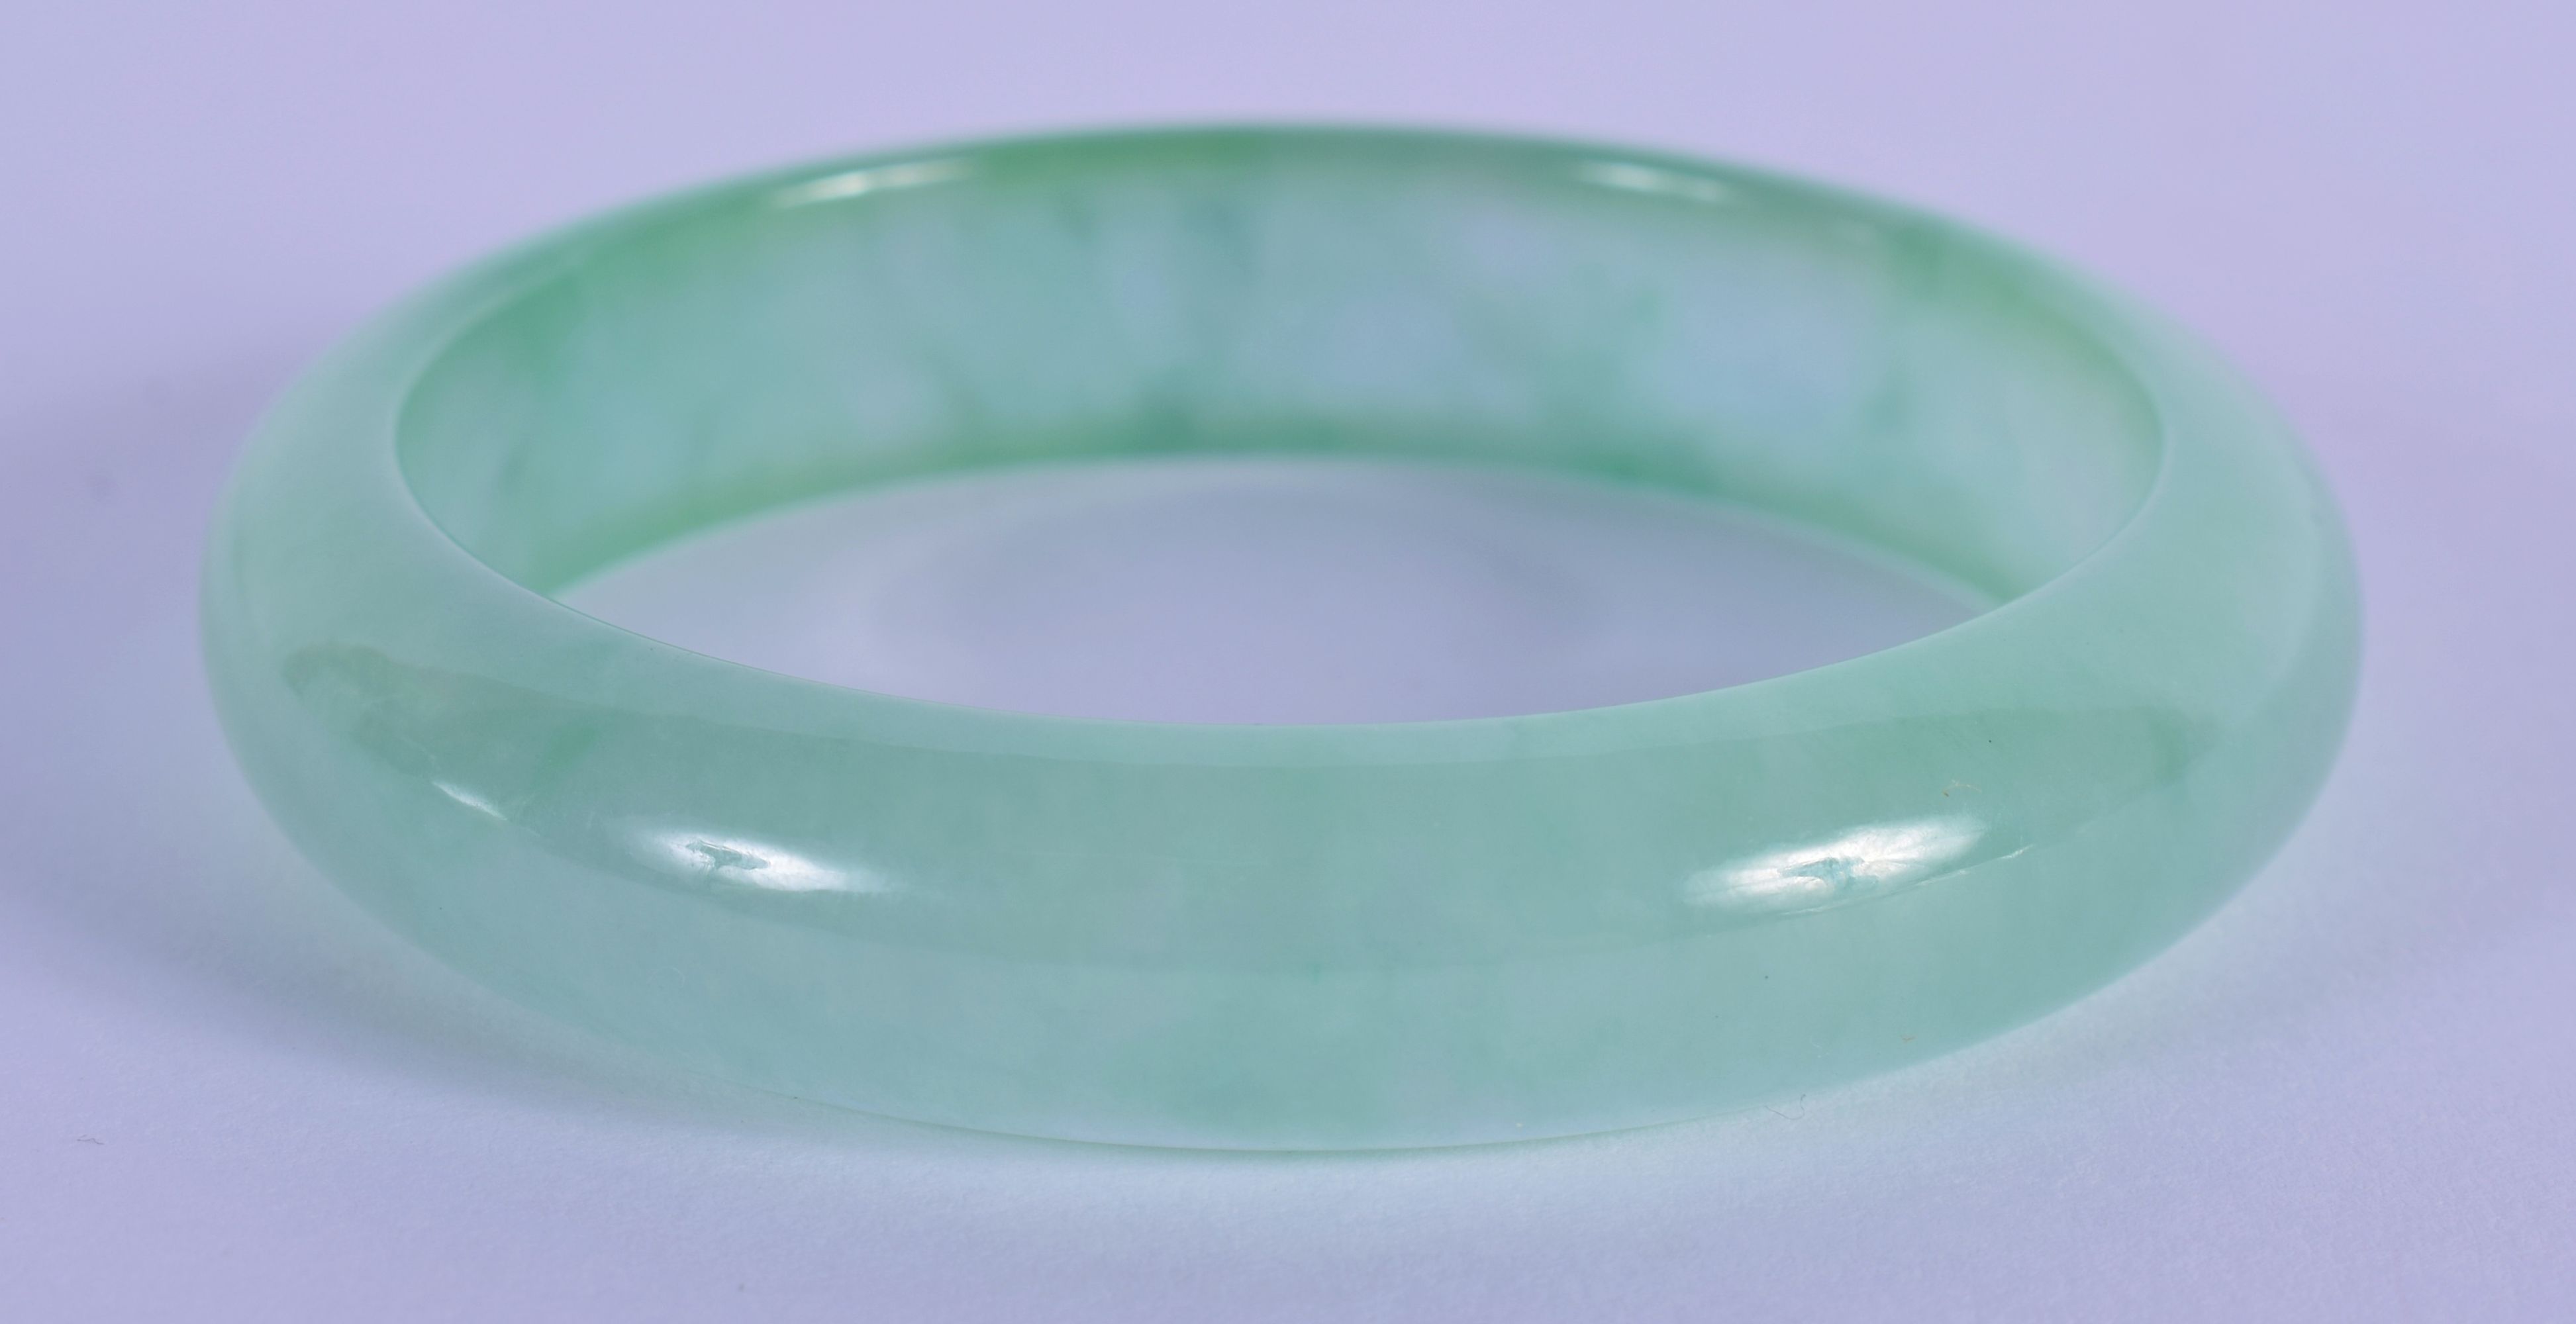 A 20TH CENTURY CHINESE CARVED ICY JADE BANGLE . 7cm Diameter